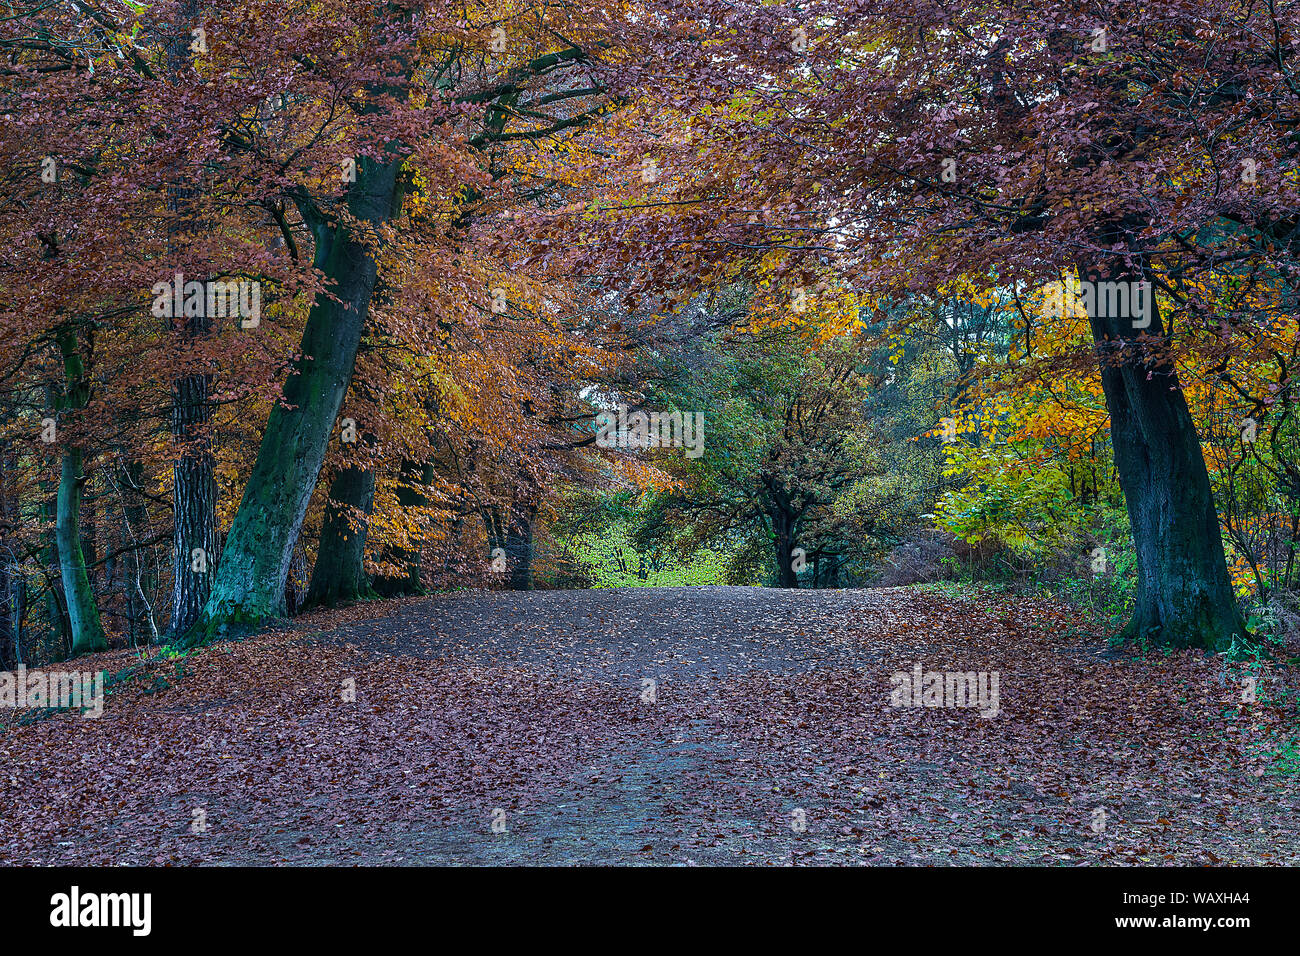 Autumn colours in Delamere Forest Cheshire UK November 2018 Stock Photo